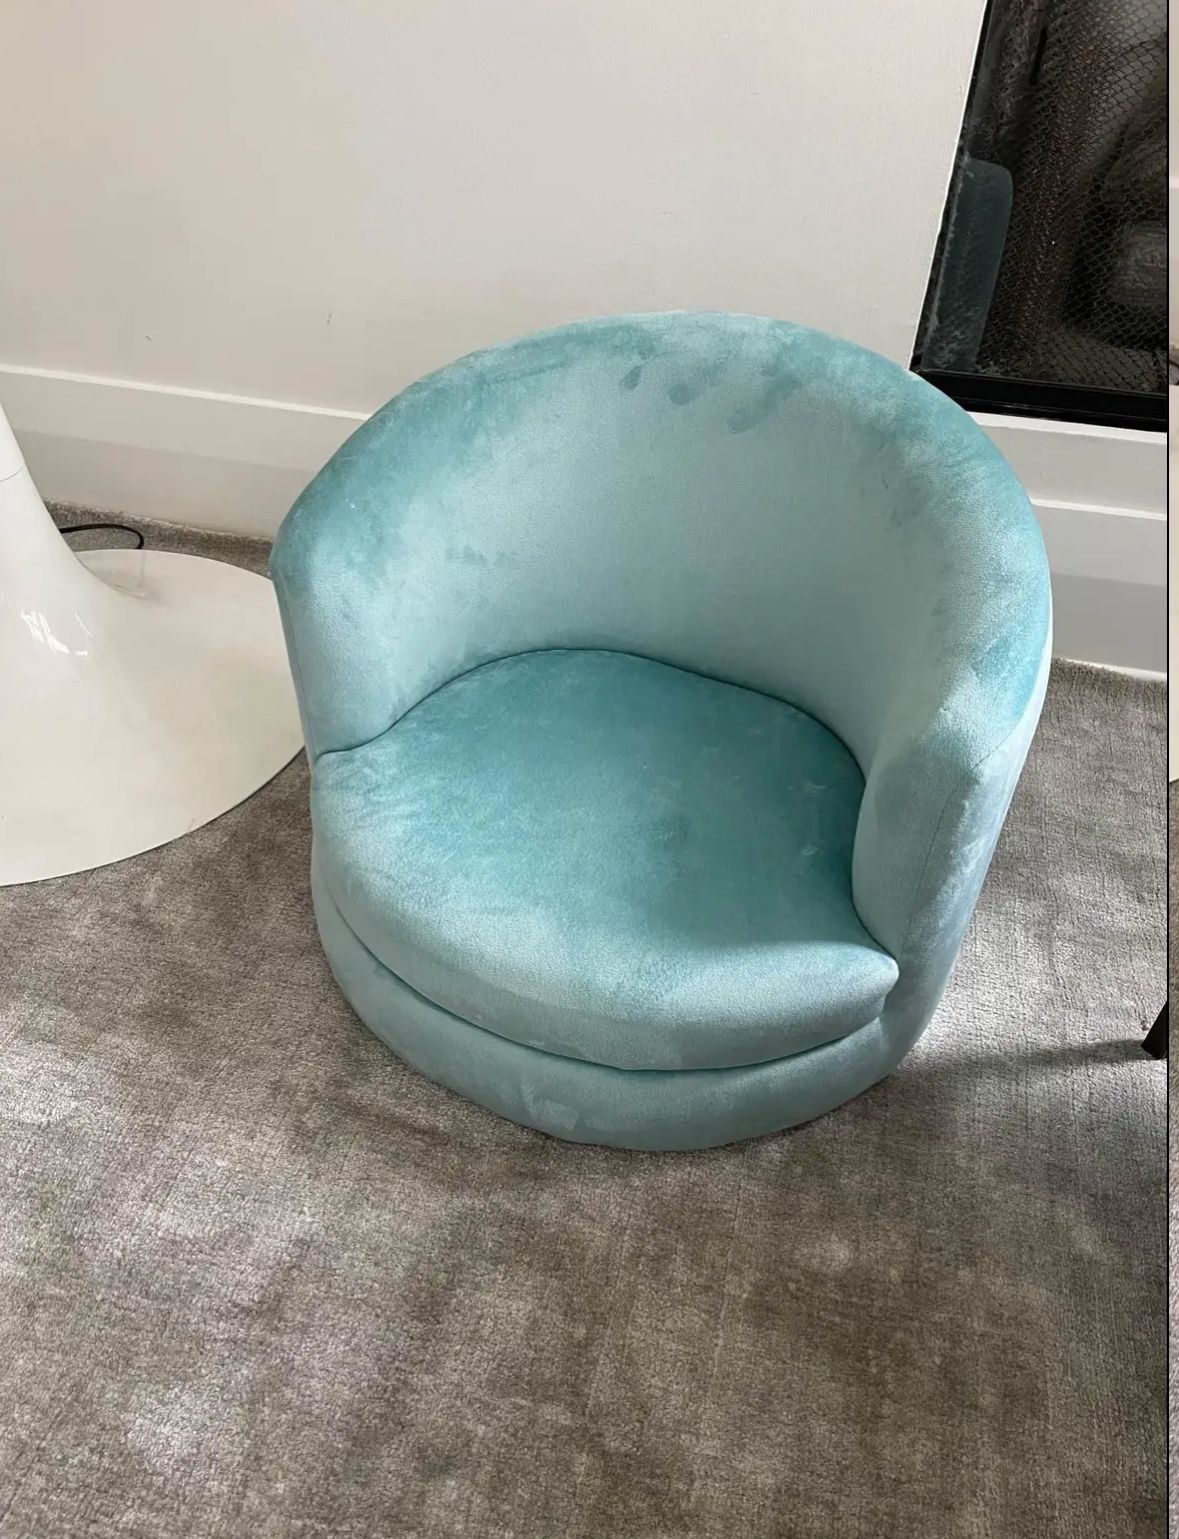 Child’s Blue Reading Or Lounge Chair 